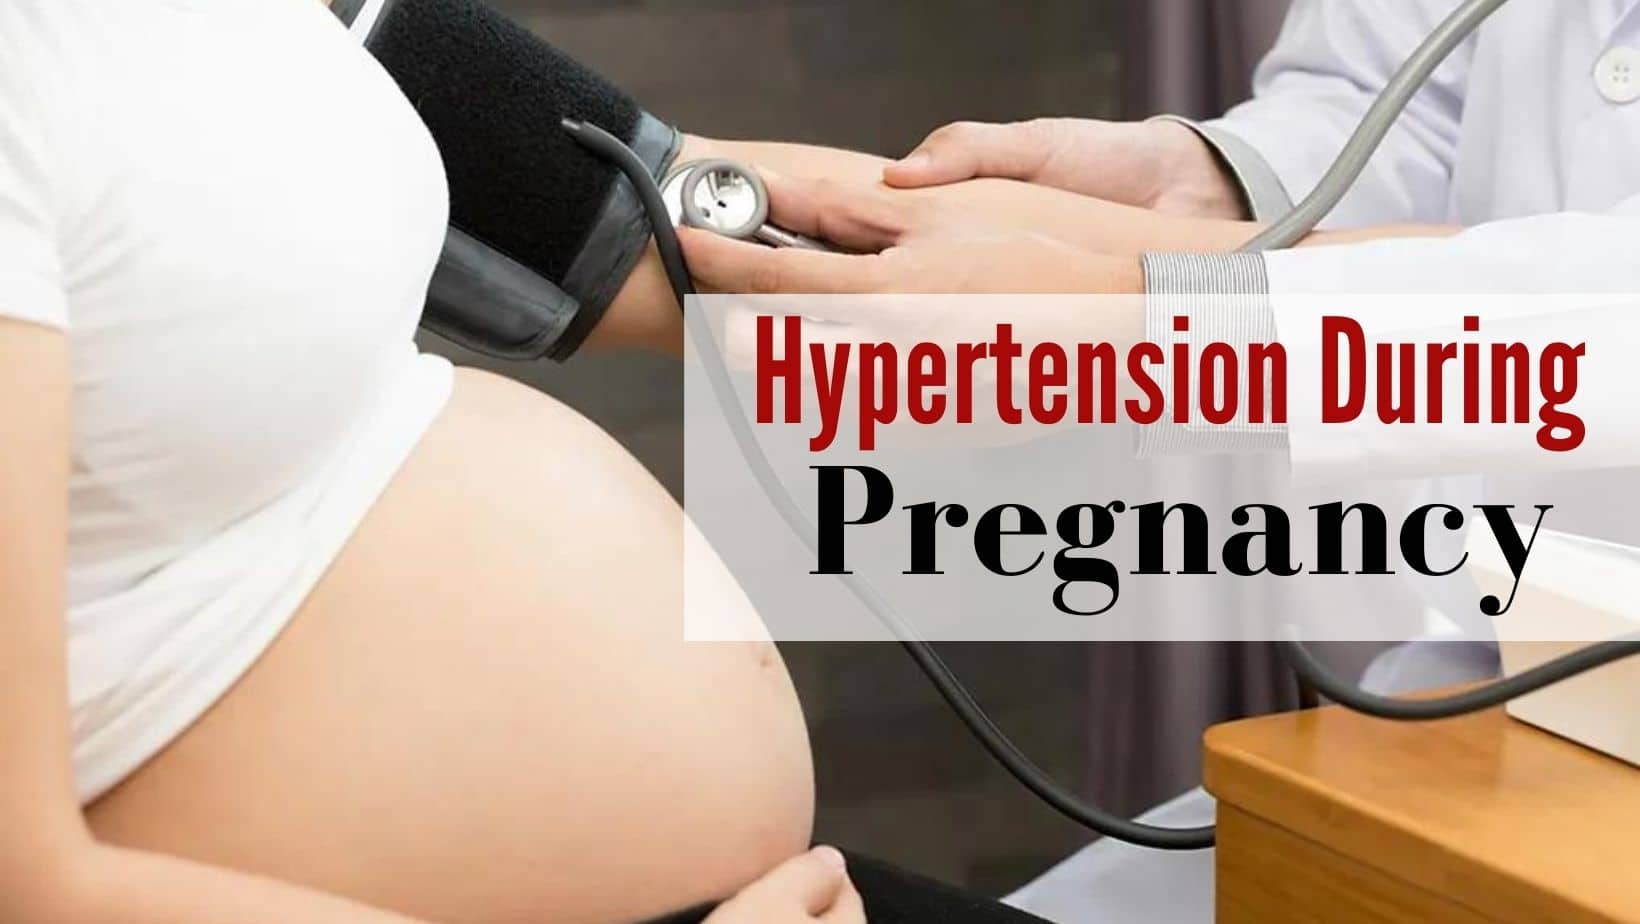 Nosebleeds To Placental Abruption: How Hypertension Affects Your Pregnancy